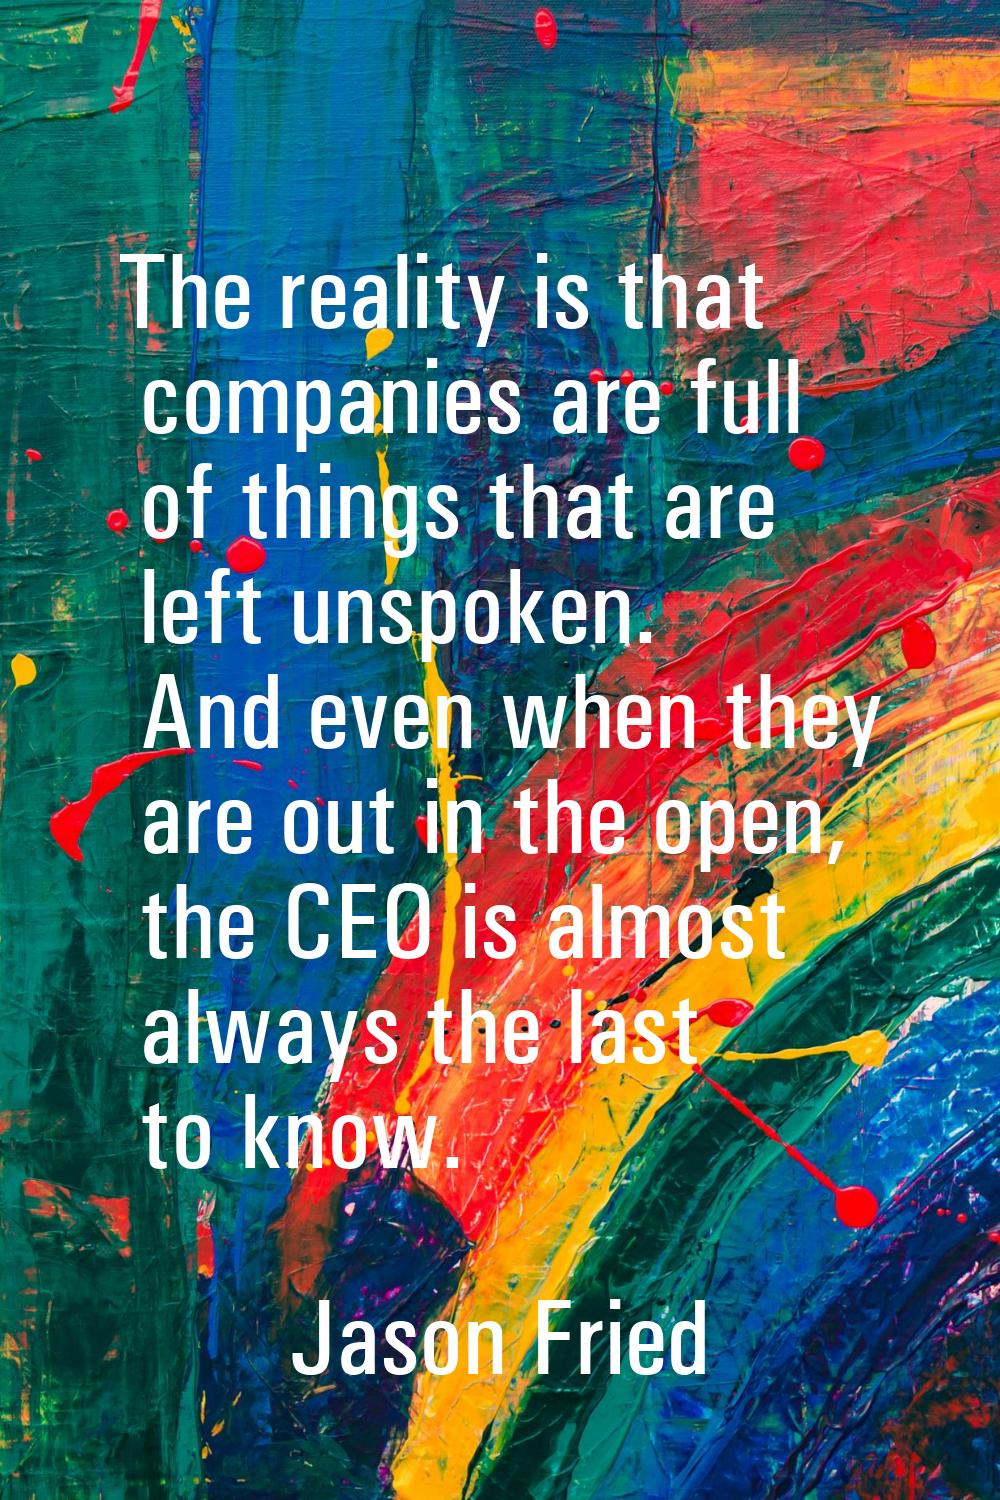 The reality is that companies are full of things that are left unspoken. And even when they are out